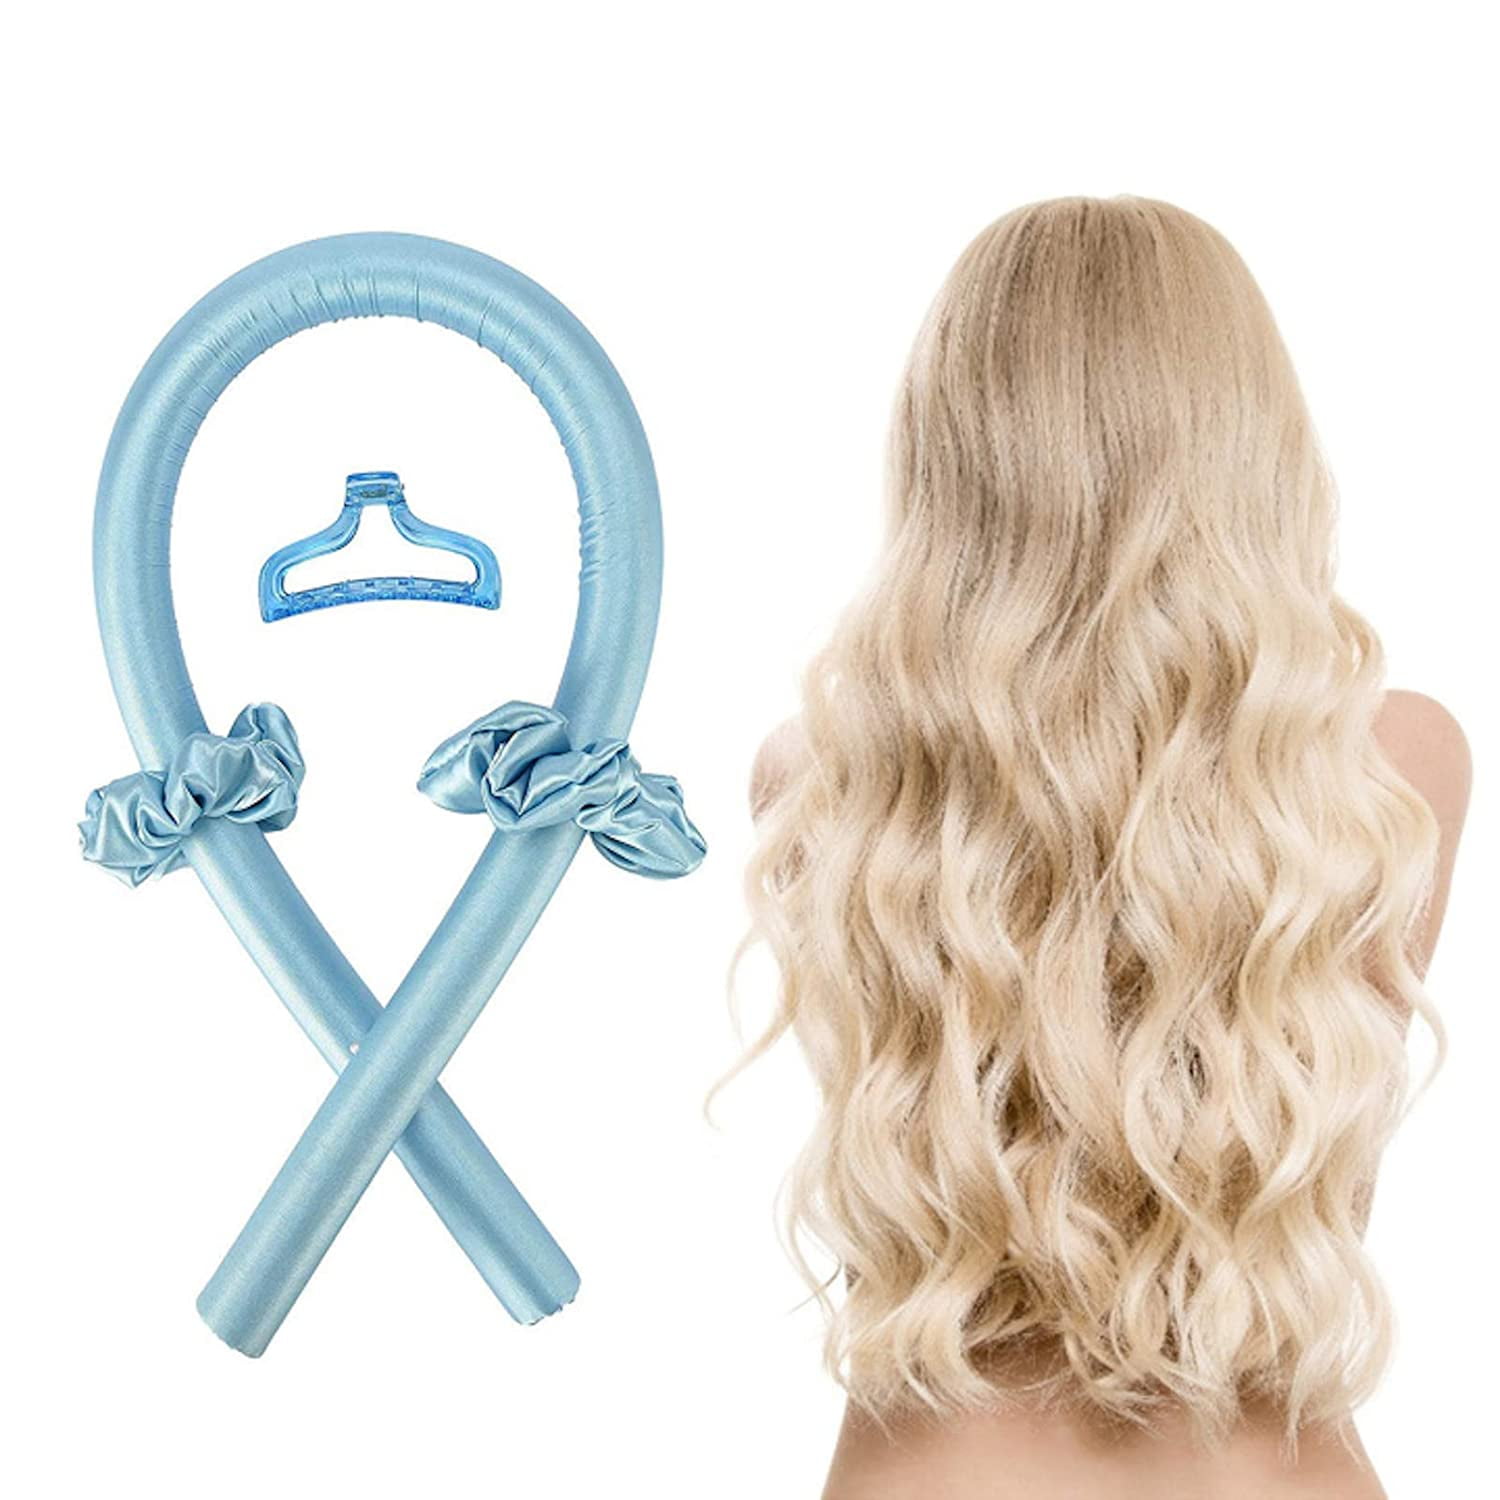 Accessoires Haaraccessoires Haarspelden and 5 bobby pins BY Piubella Heatless curls come with 2 hairbands 1 claw clip Women Heatless Hair Curler NO DAMAGE on hairs 